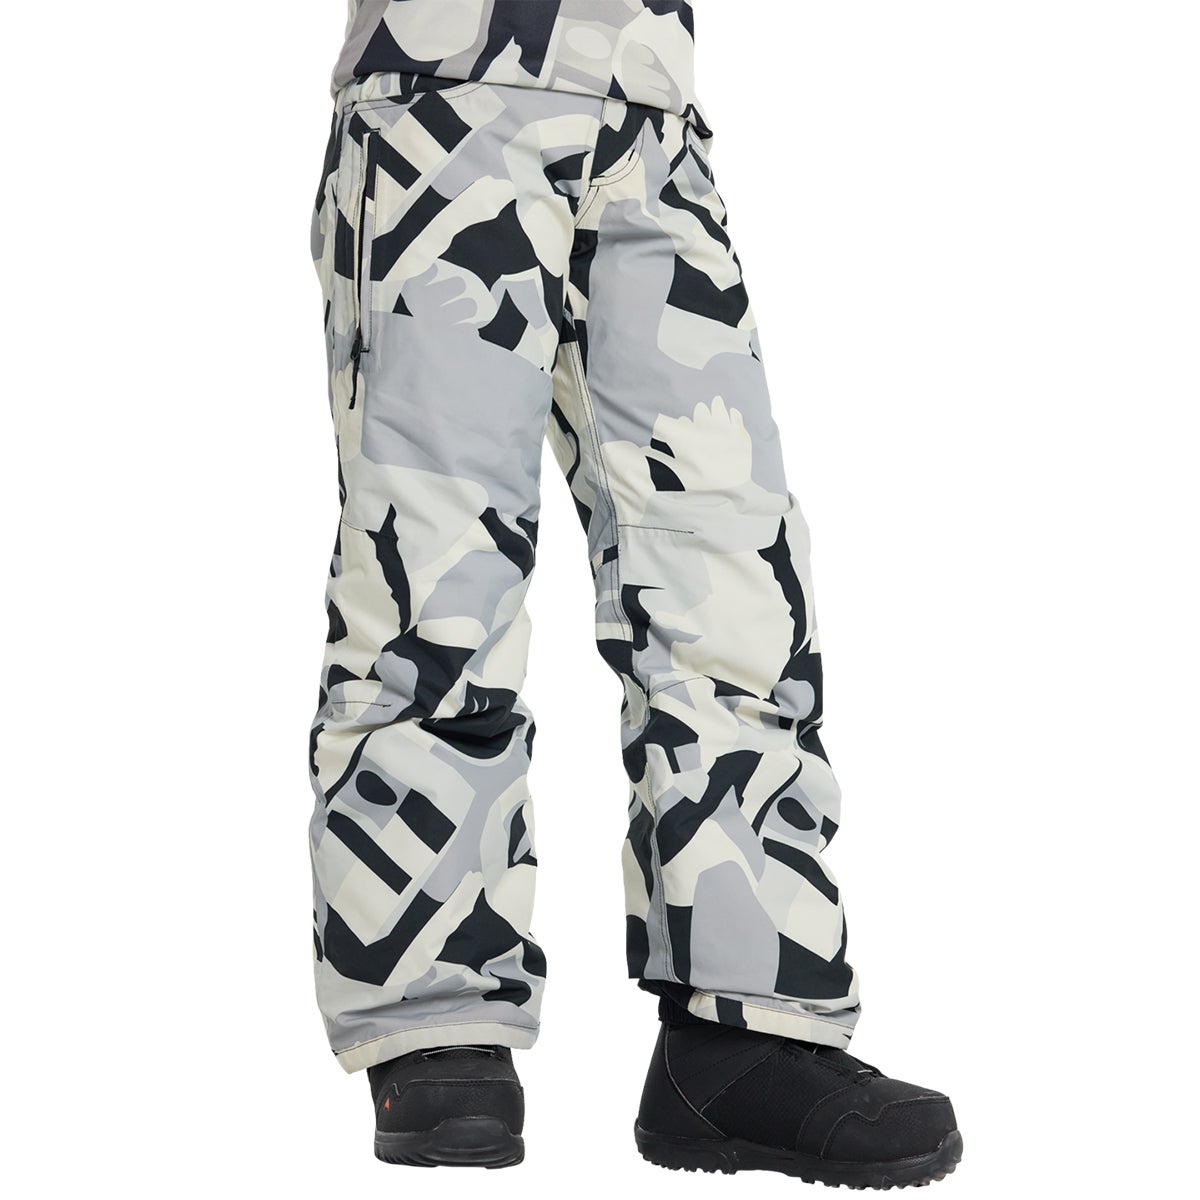 Youth Snowboard Pants | Boardertown - Free Freight / 90 Day Returns